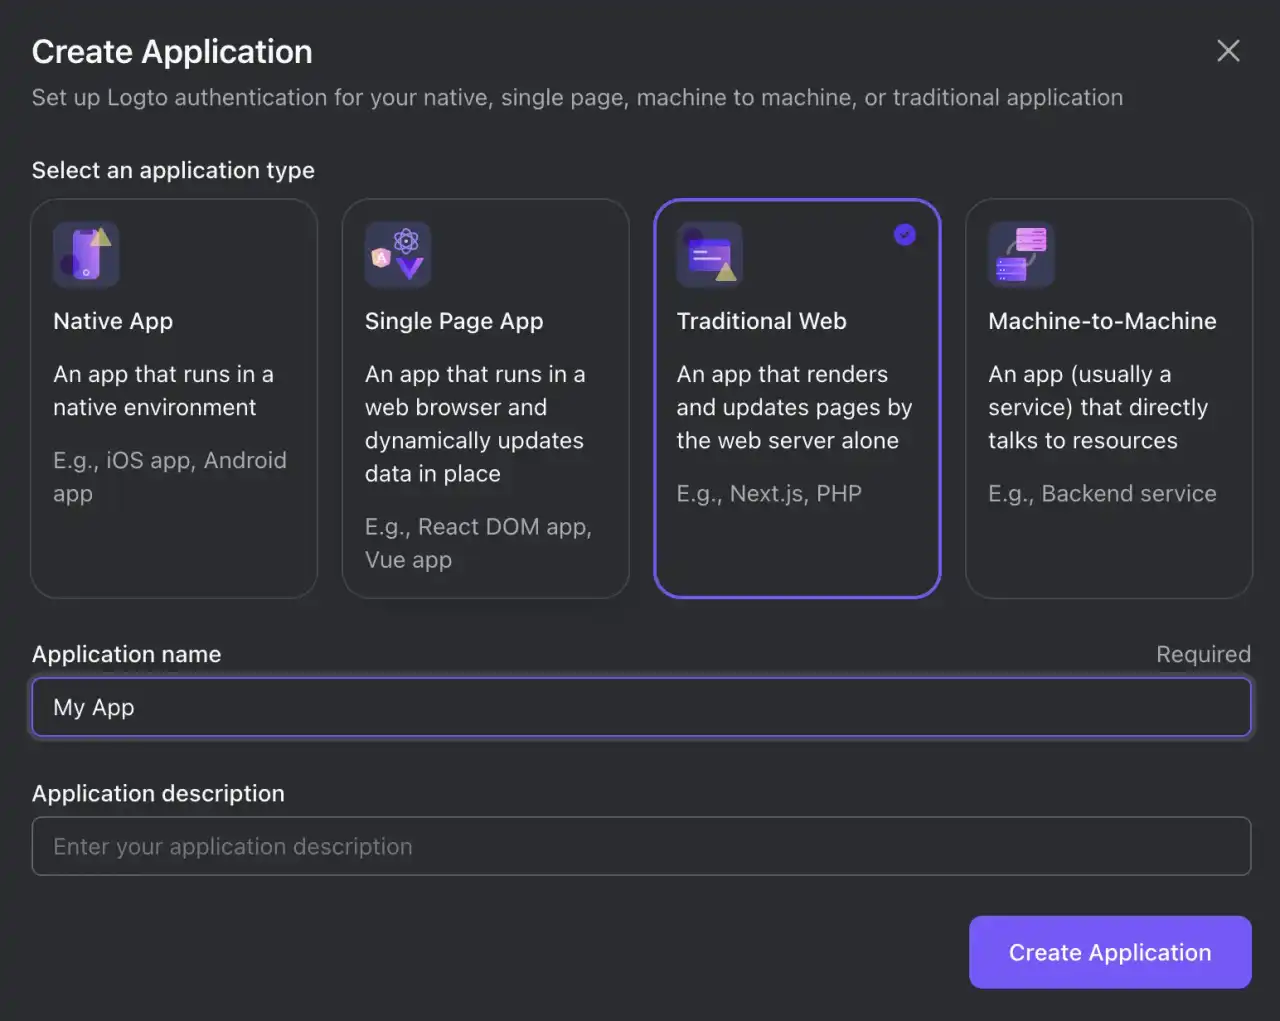 The "Create application" modal shows several application types